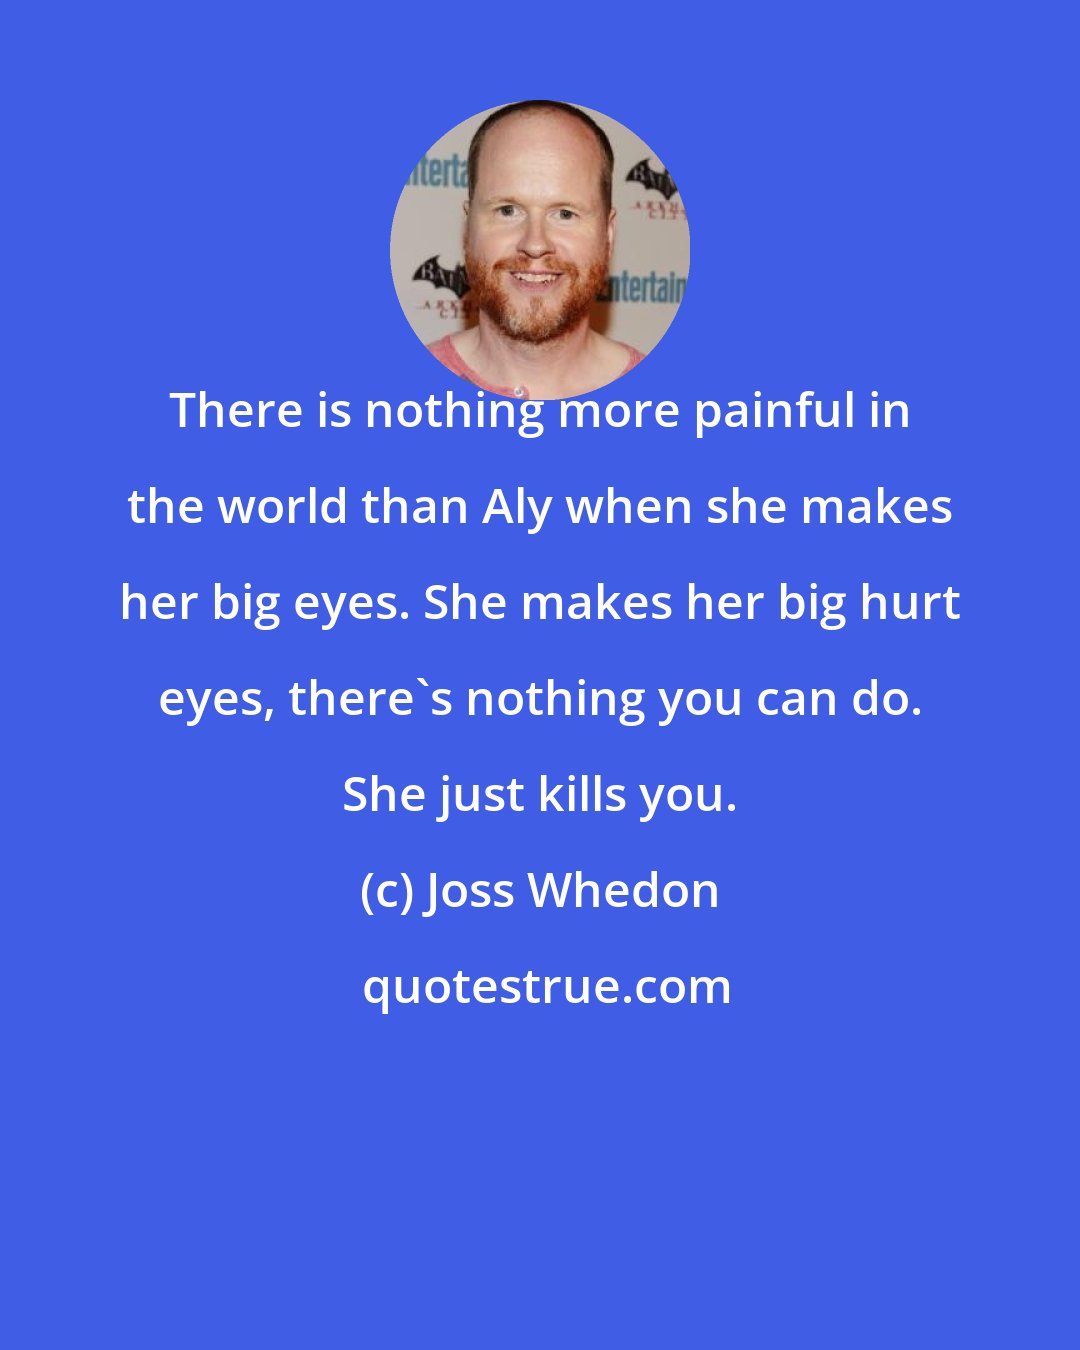 Joss Whedon: There is nothing more painful in the world than Aly when she makes her big eyes. She makes her big hurt eyes, there's nothing you can do. She just kills you.